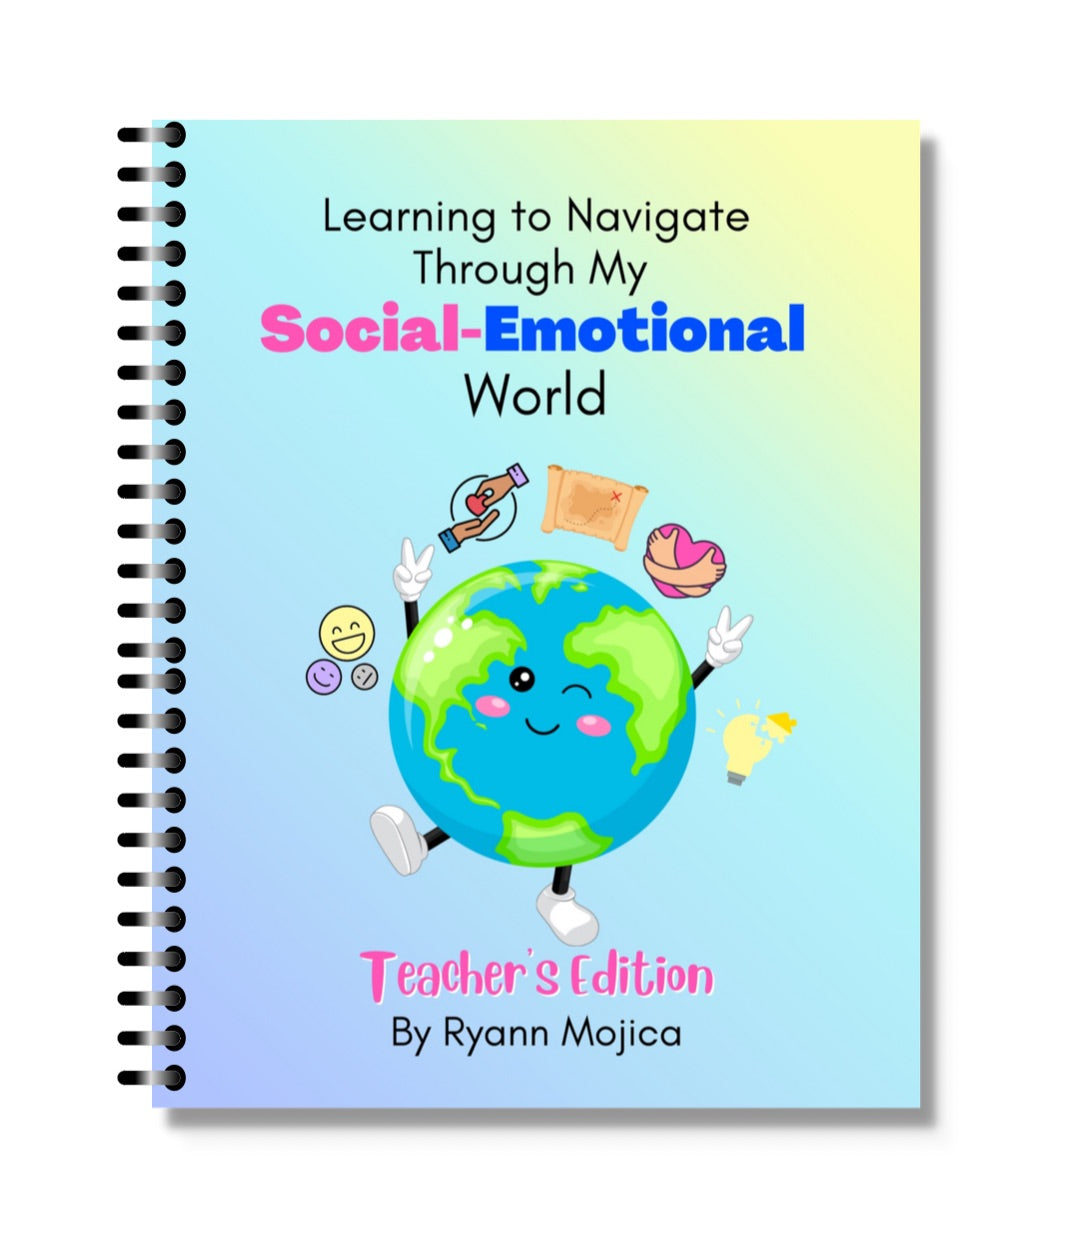 Learning to Navigate Through My Social-Emotional World- Teacher's Edition